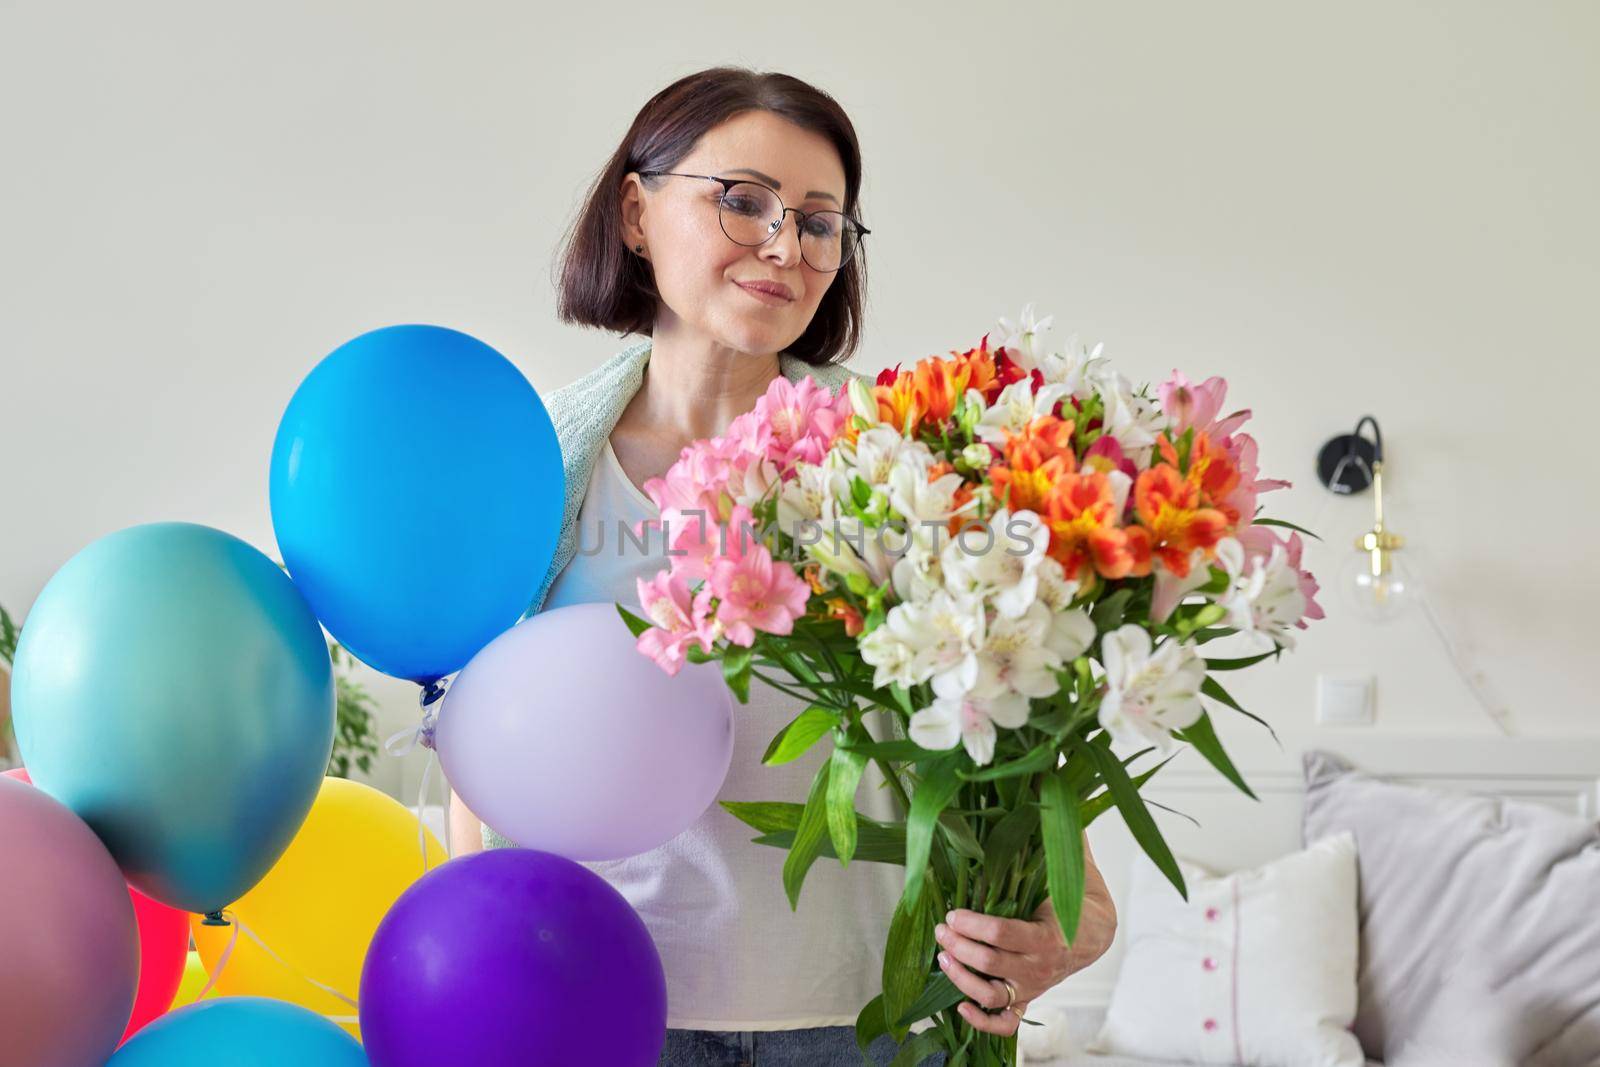 Birthday, 45 years old, happy middle-aged female with bouquet of flowers and balloons at home in the room. Mature age, celebration, anniversary, people concept